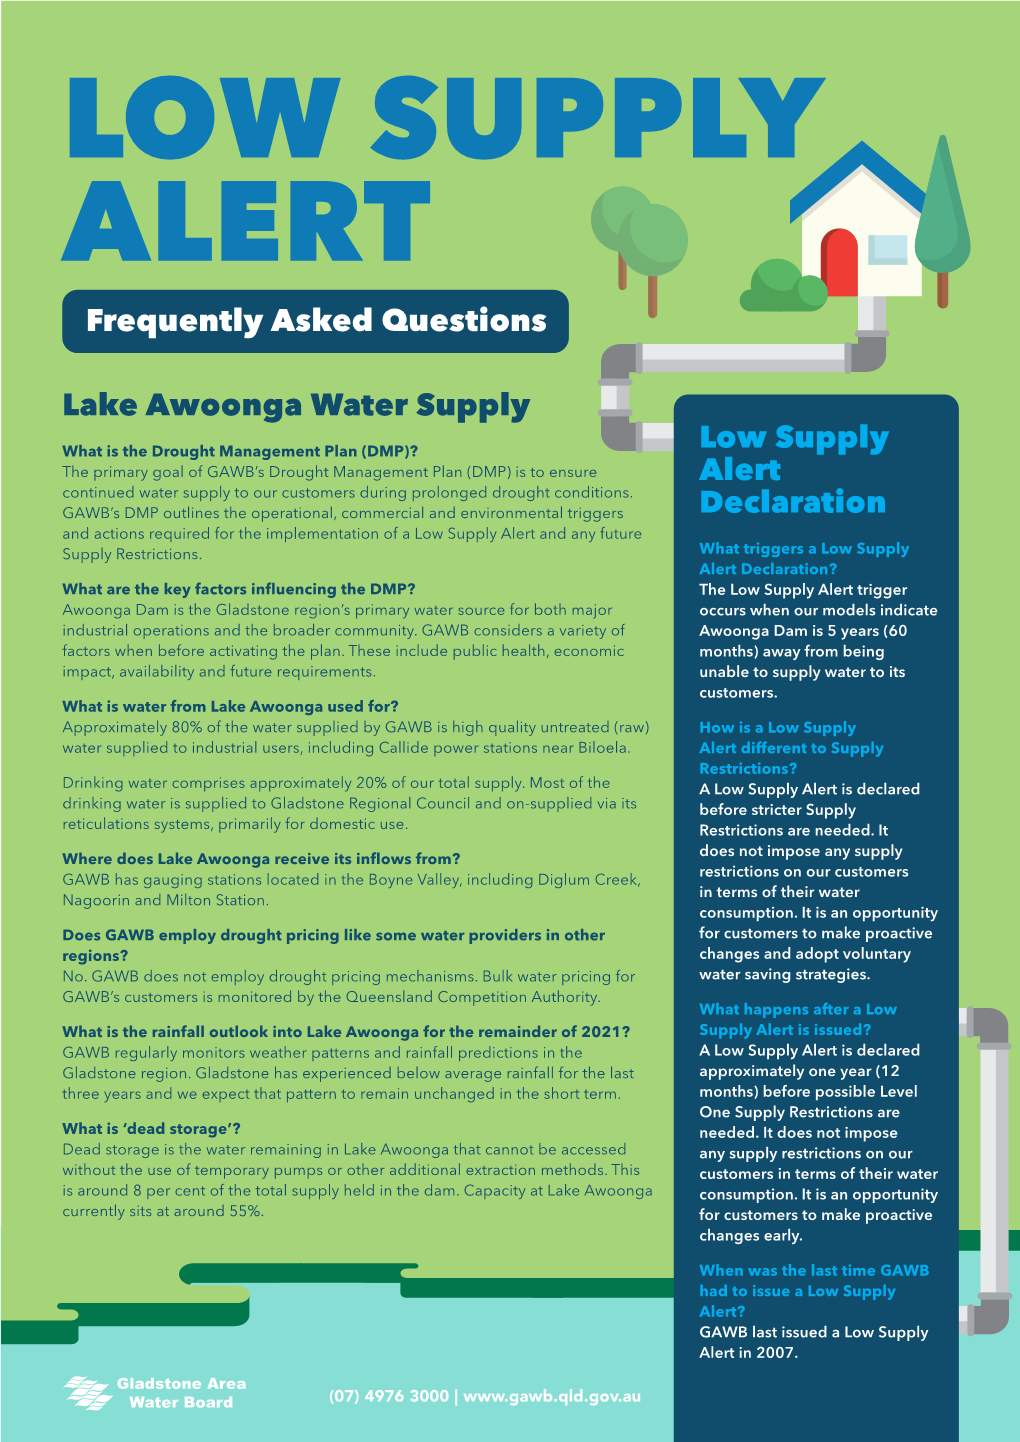 LOW SUPPLY ALERT Frequently Asked Questions